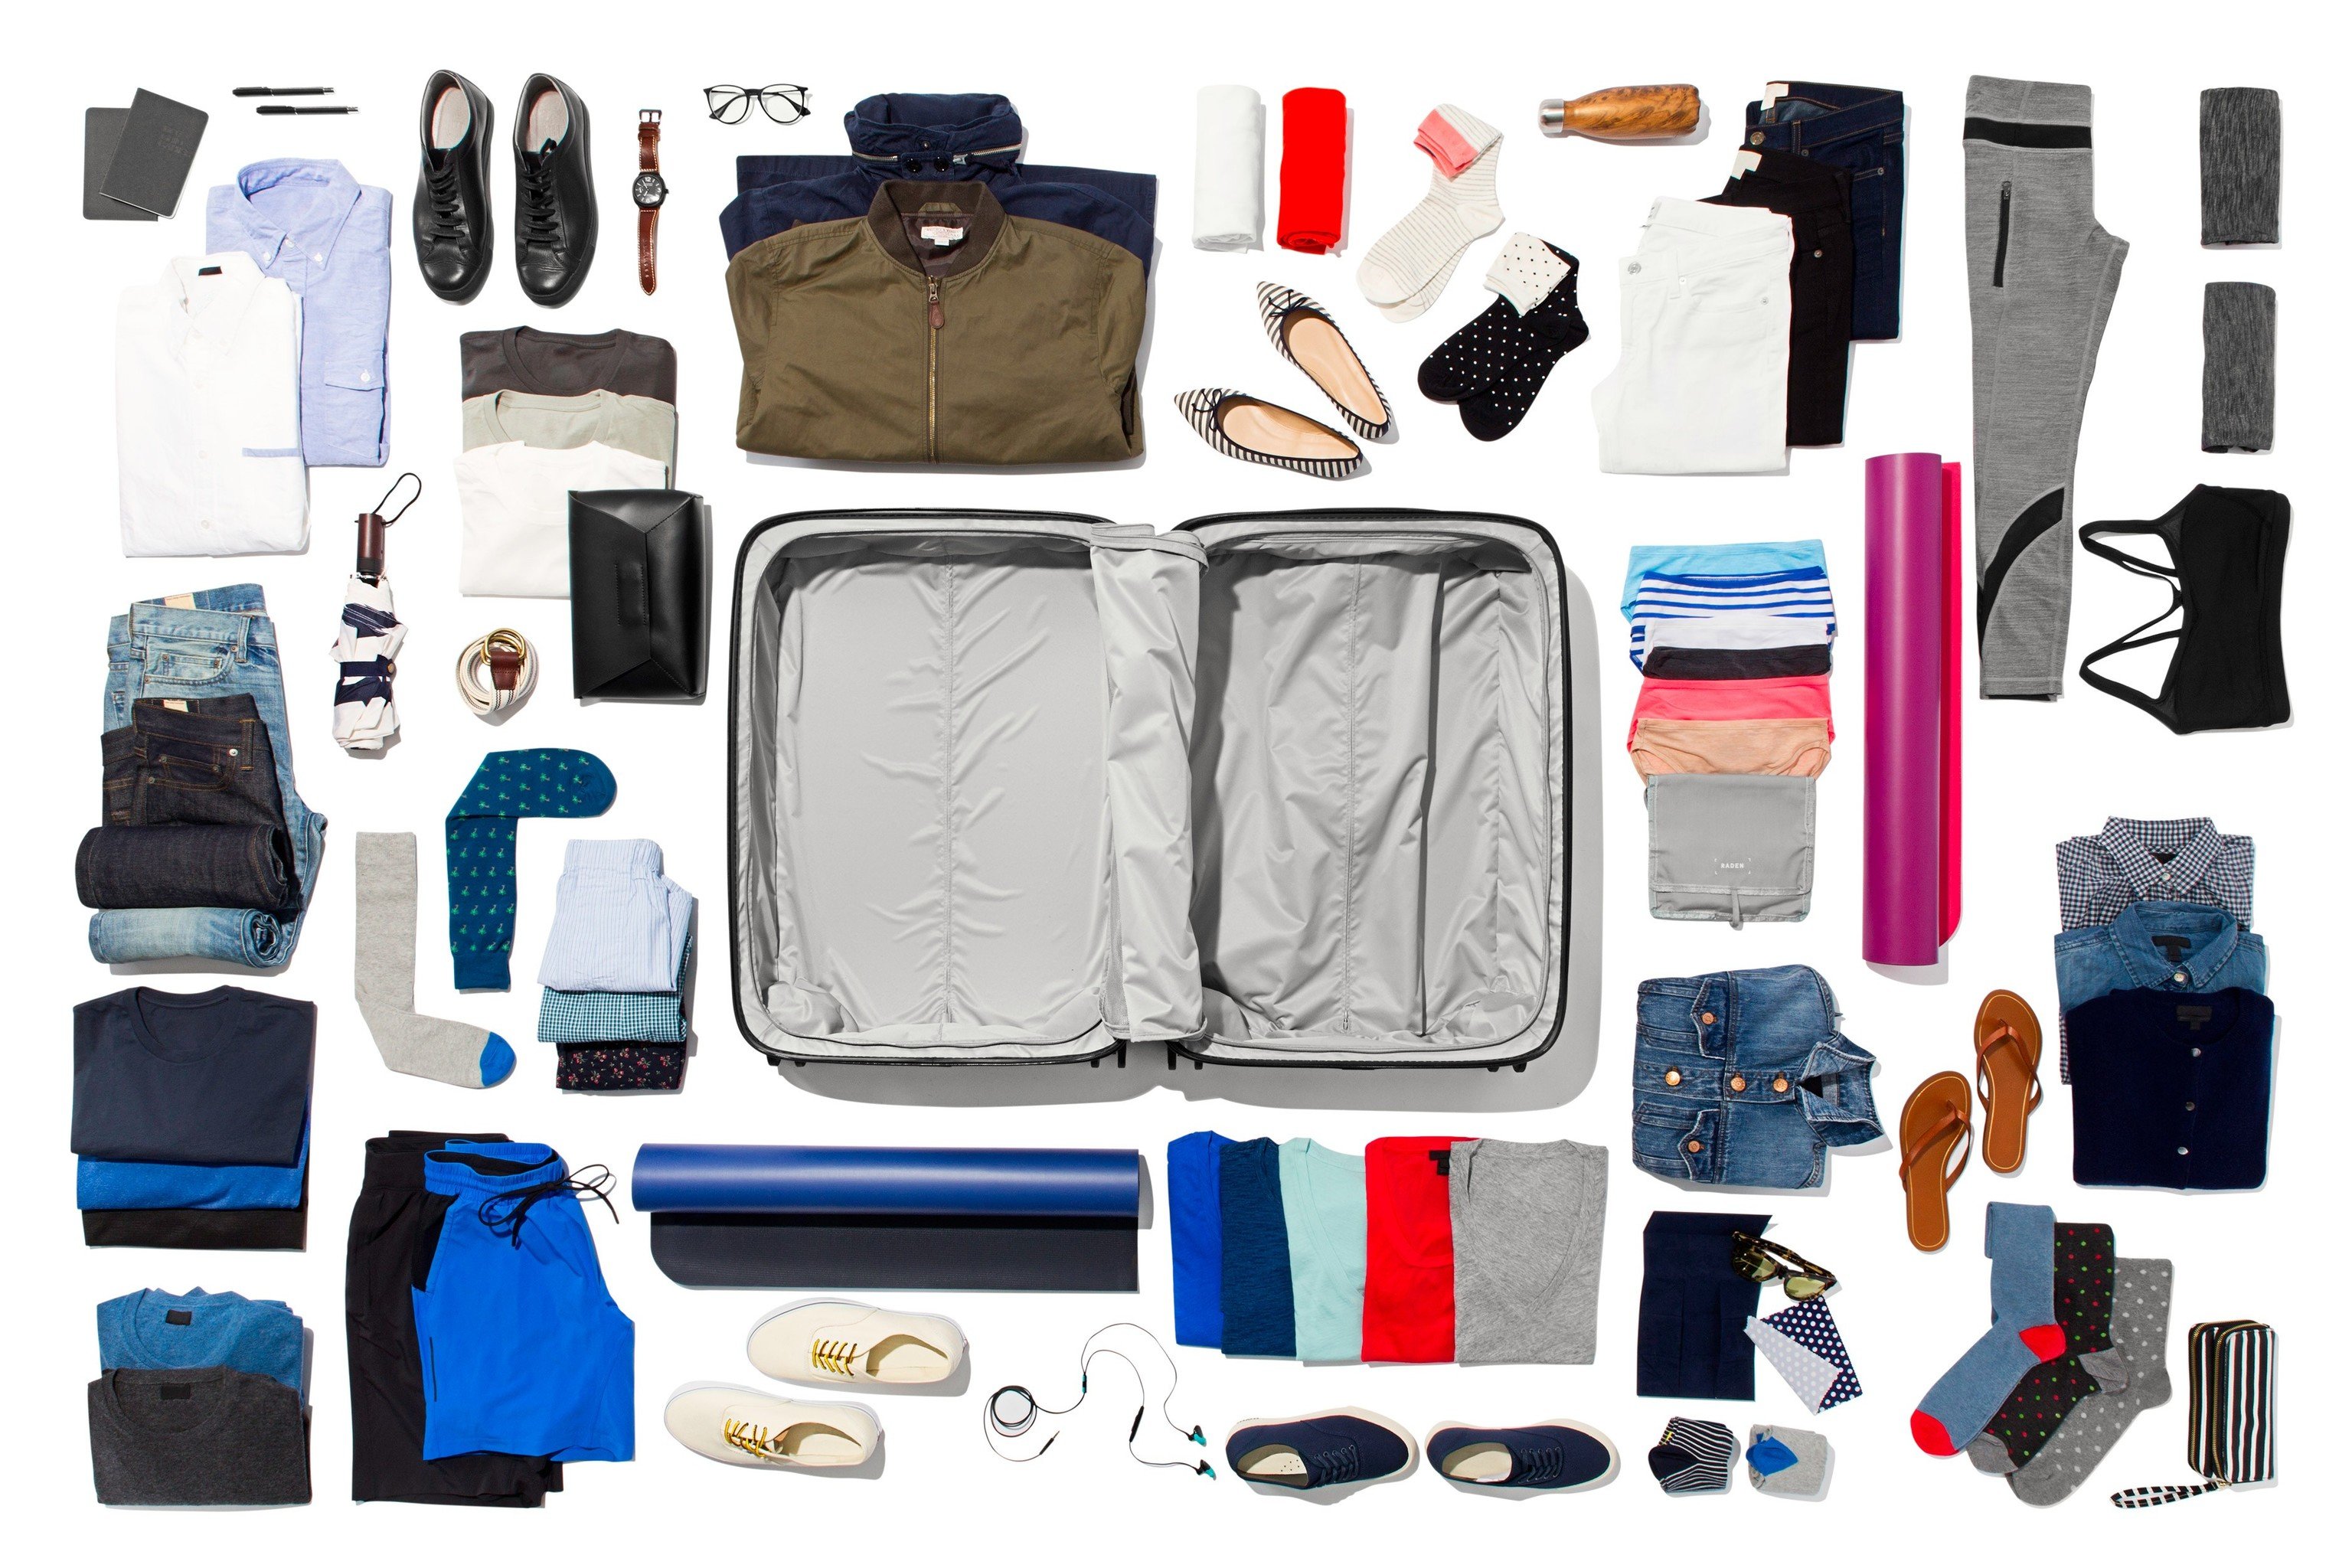 How many clothes to pack for 7 days - The Travel Hack